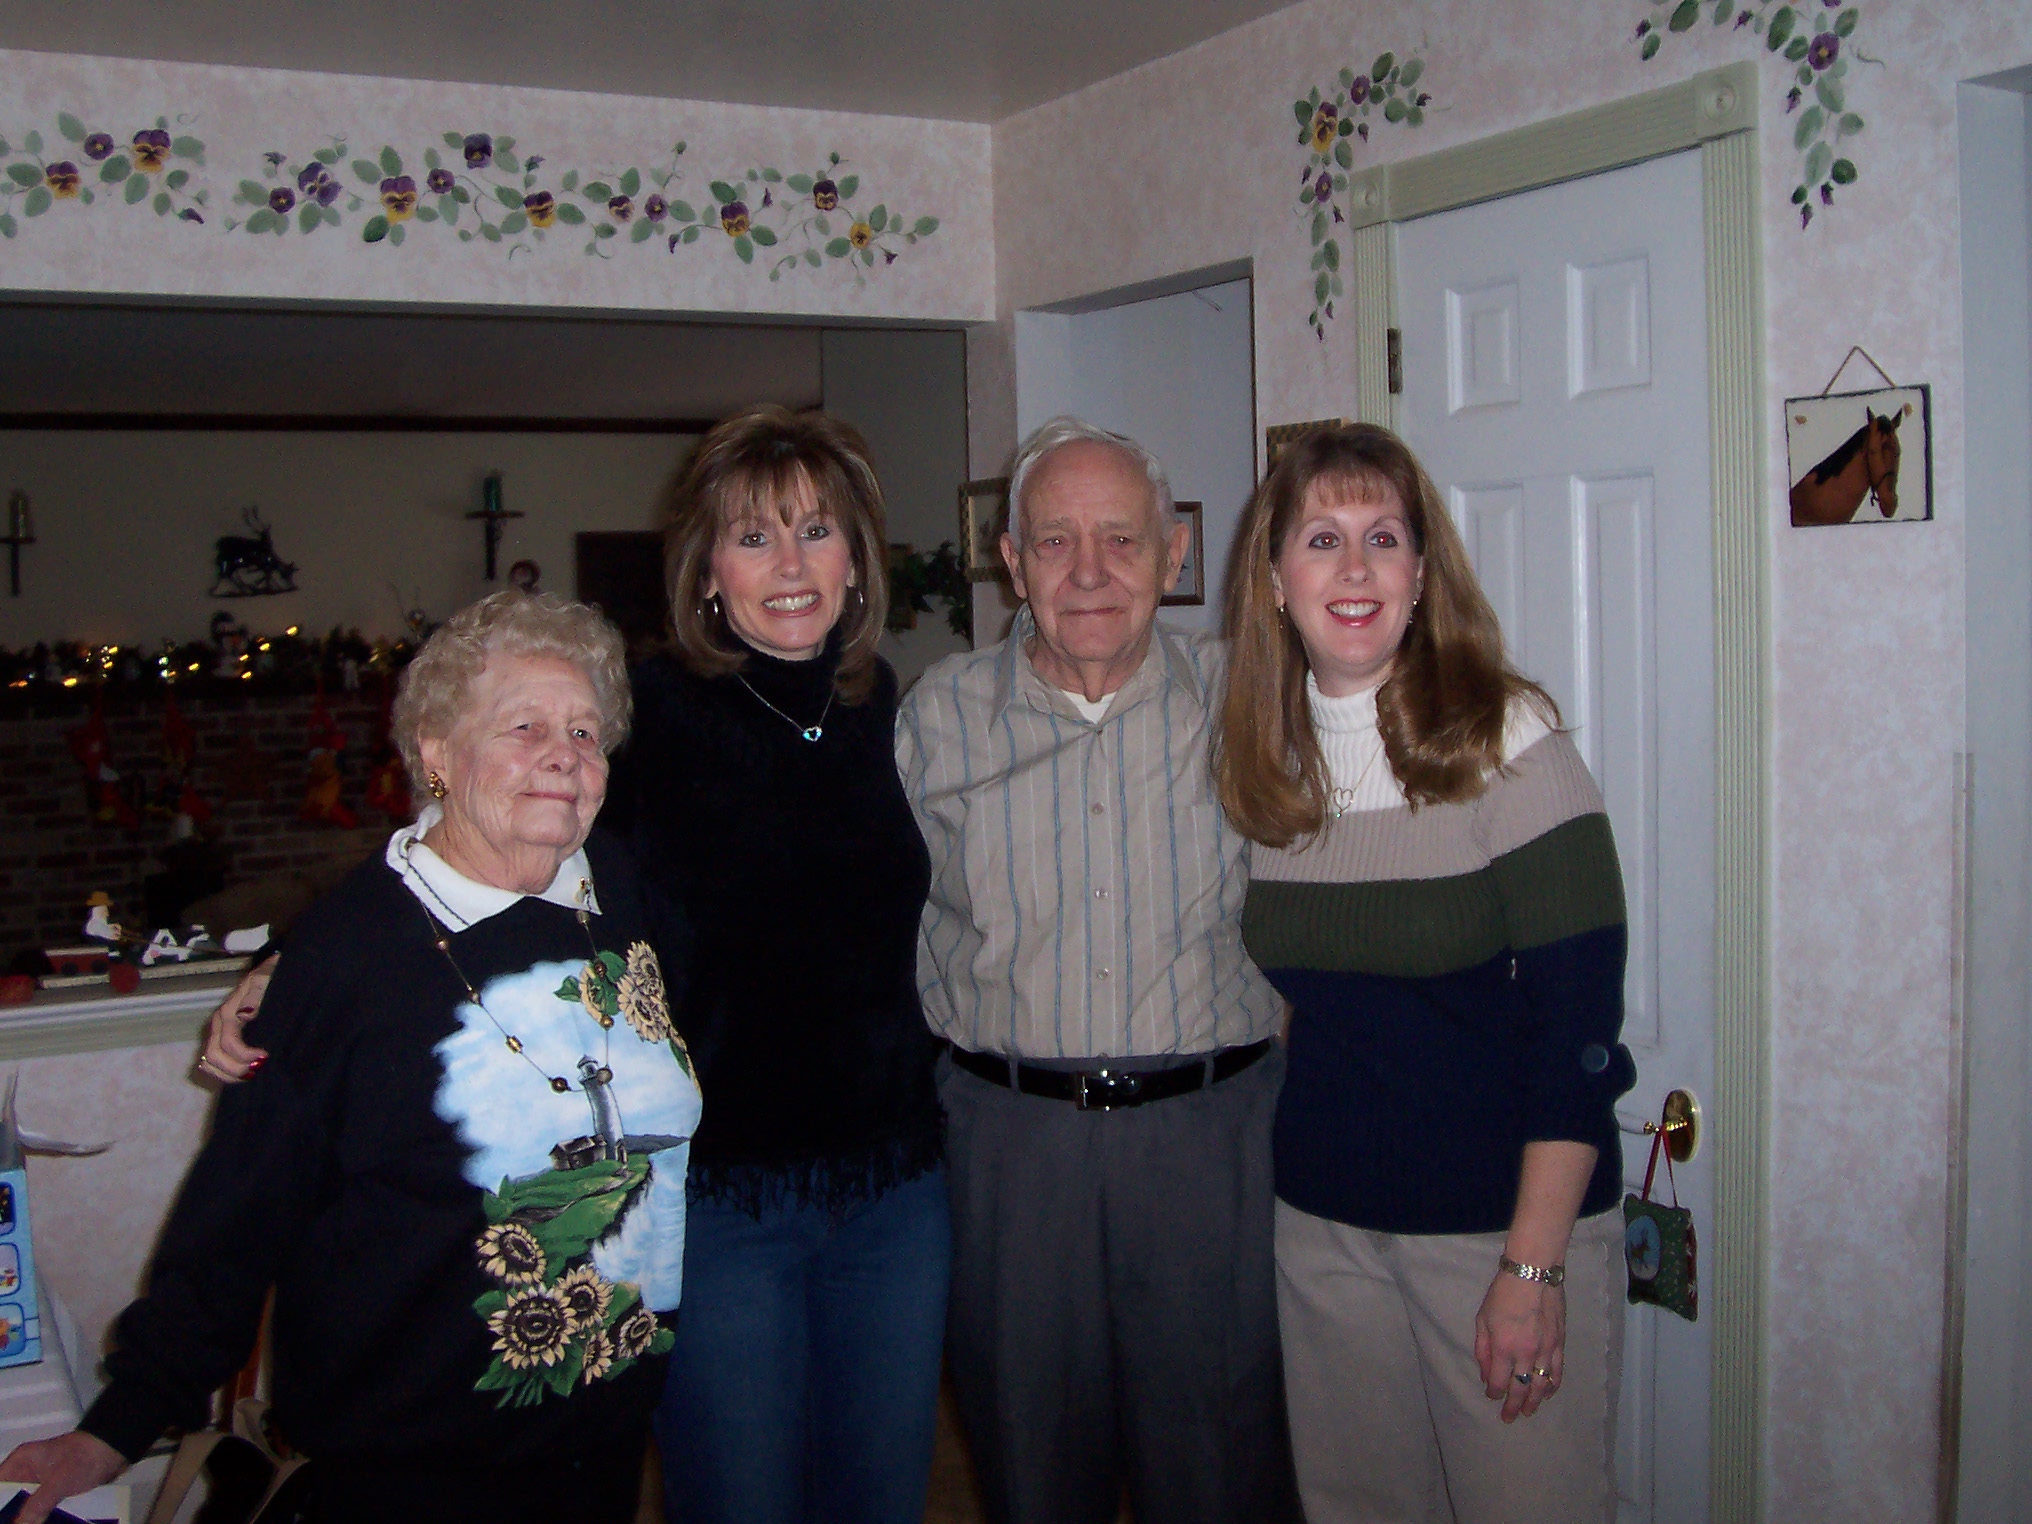 Virginia & Charles with Grandchildren Marilyn(left) and Lorie(right) Christmas 2003